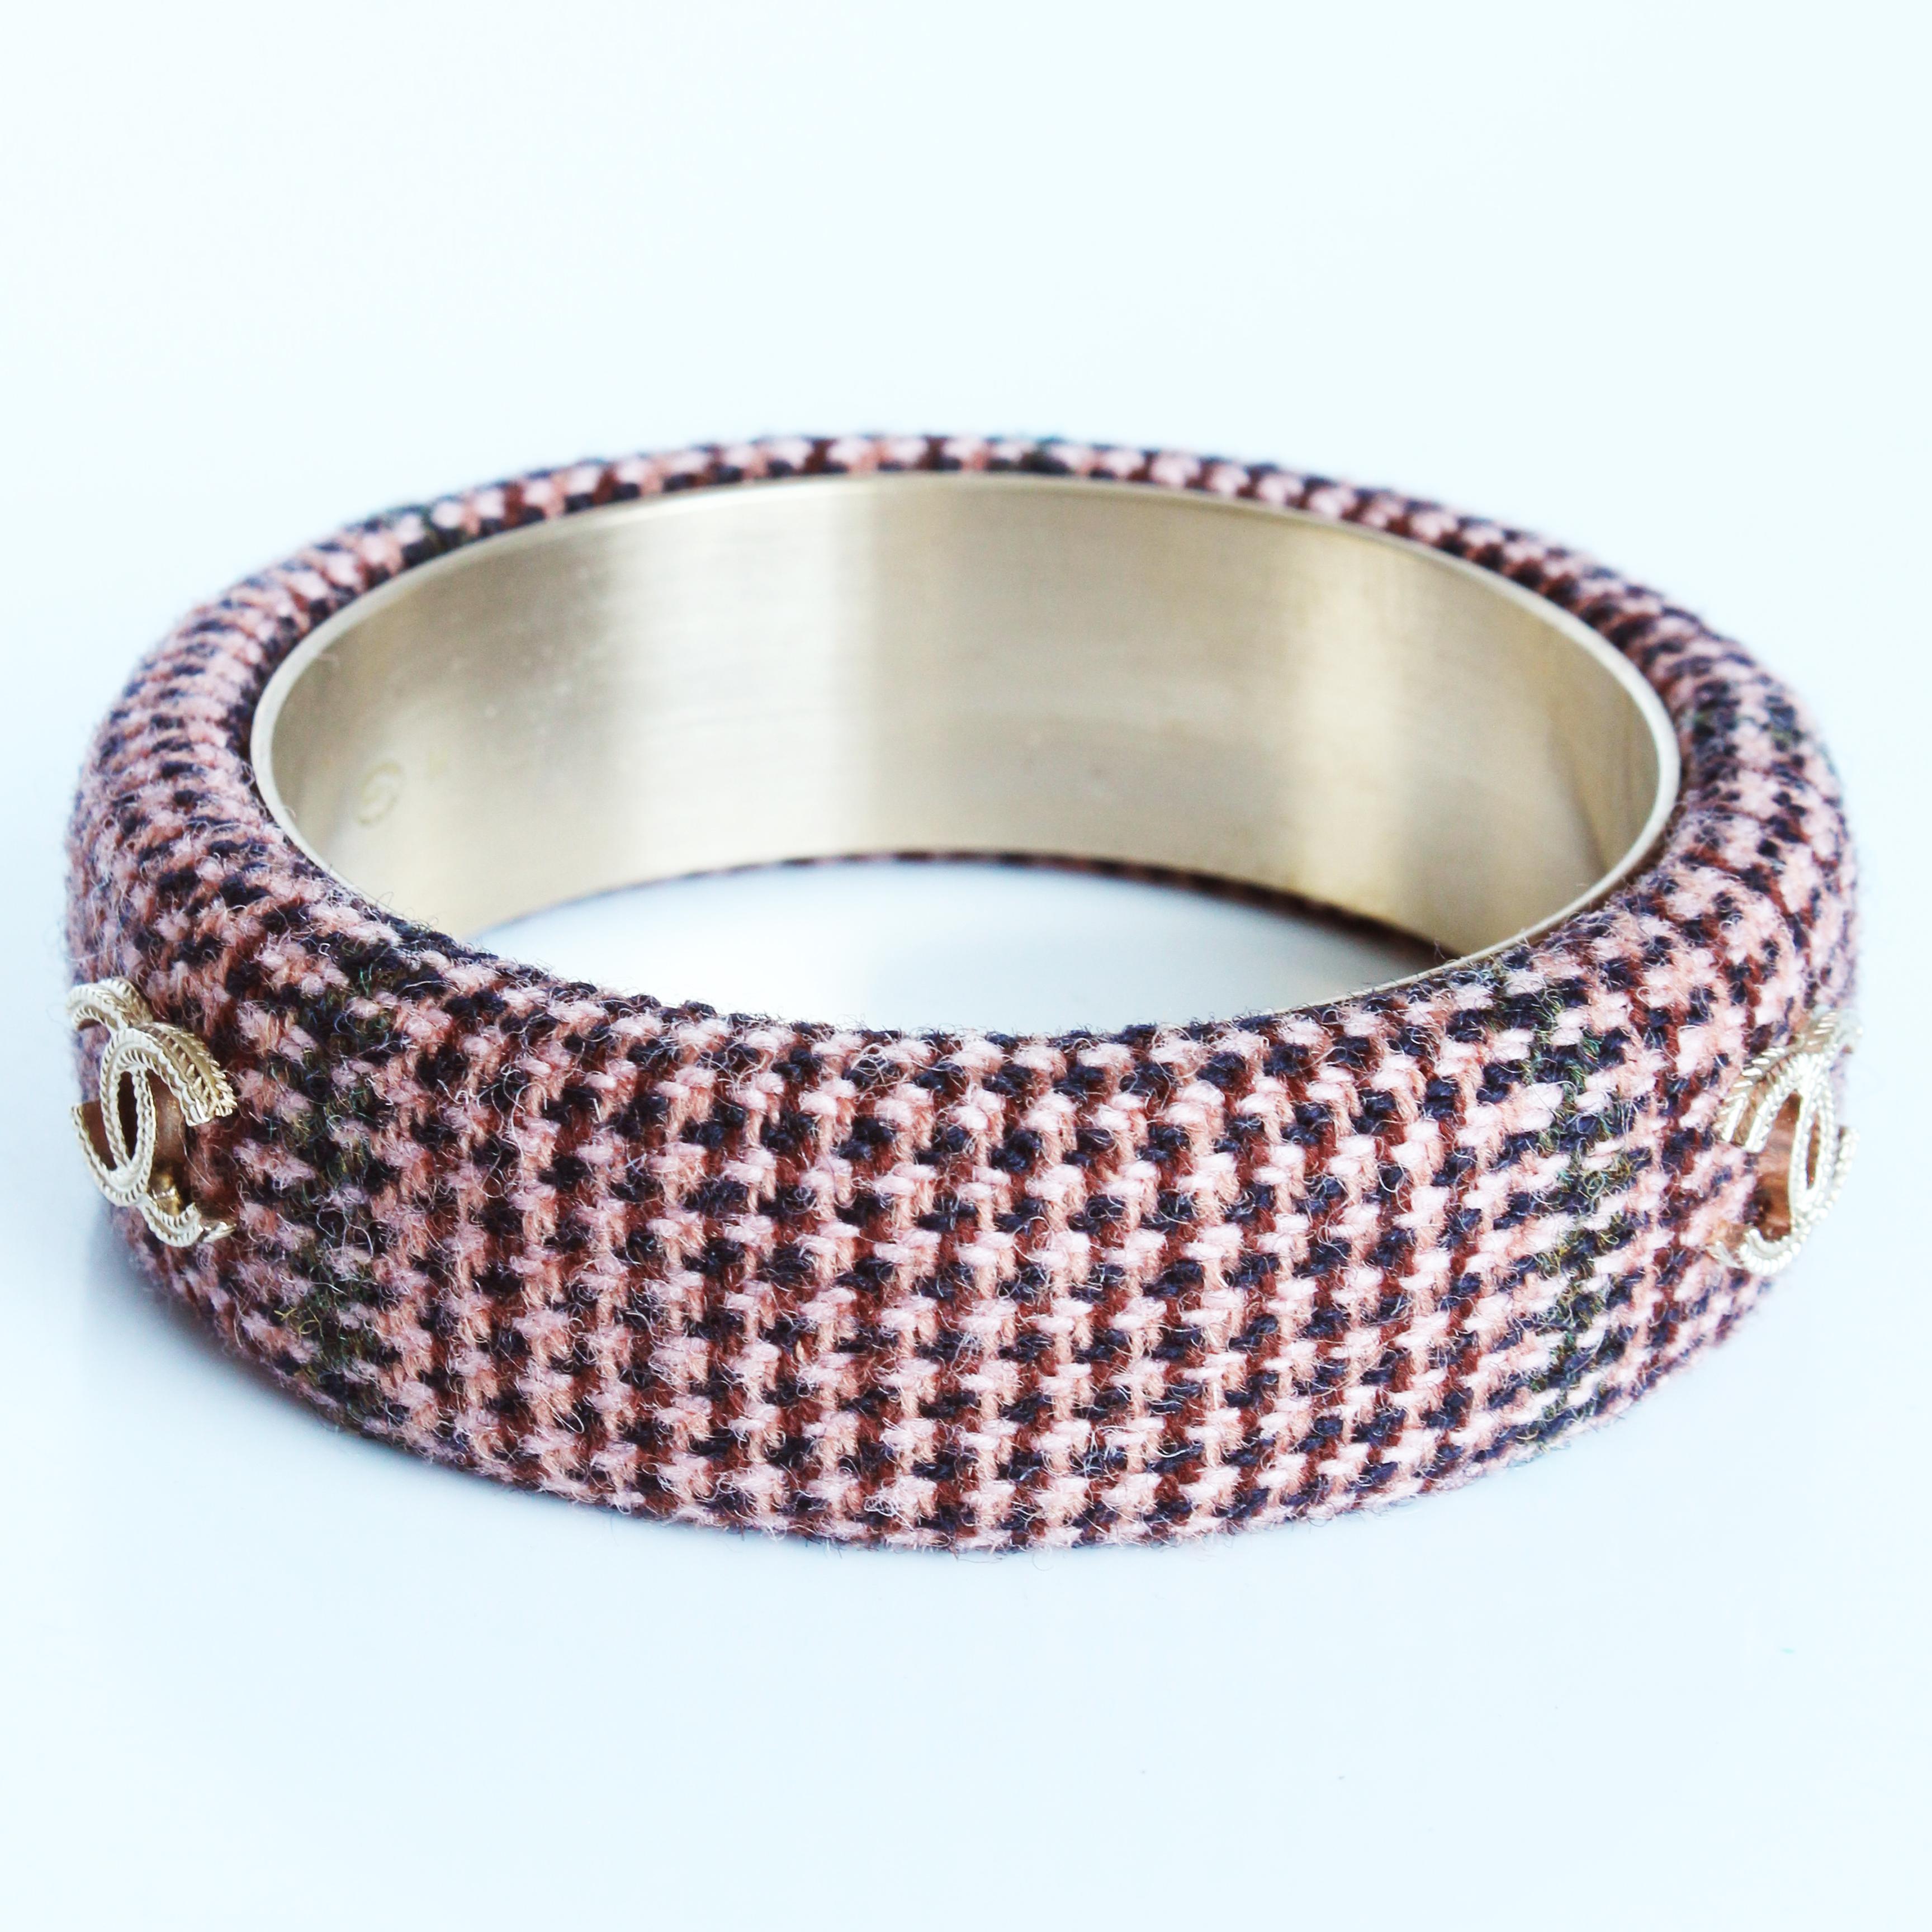 Chanel Bracelet Bangle 13A Pink Multicolor Tweed Knit with Gold CC Logo in Box  In Good Condition For Sale In Port Saint Lucie, FL